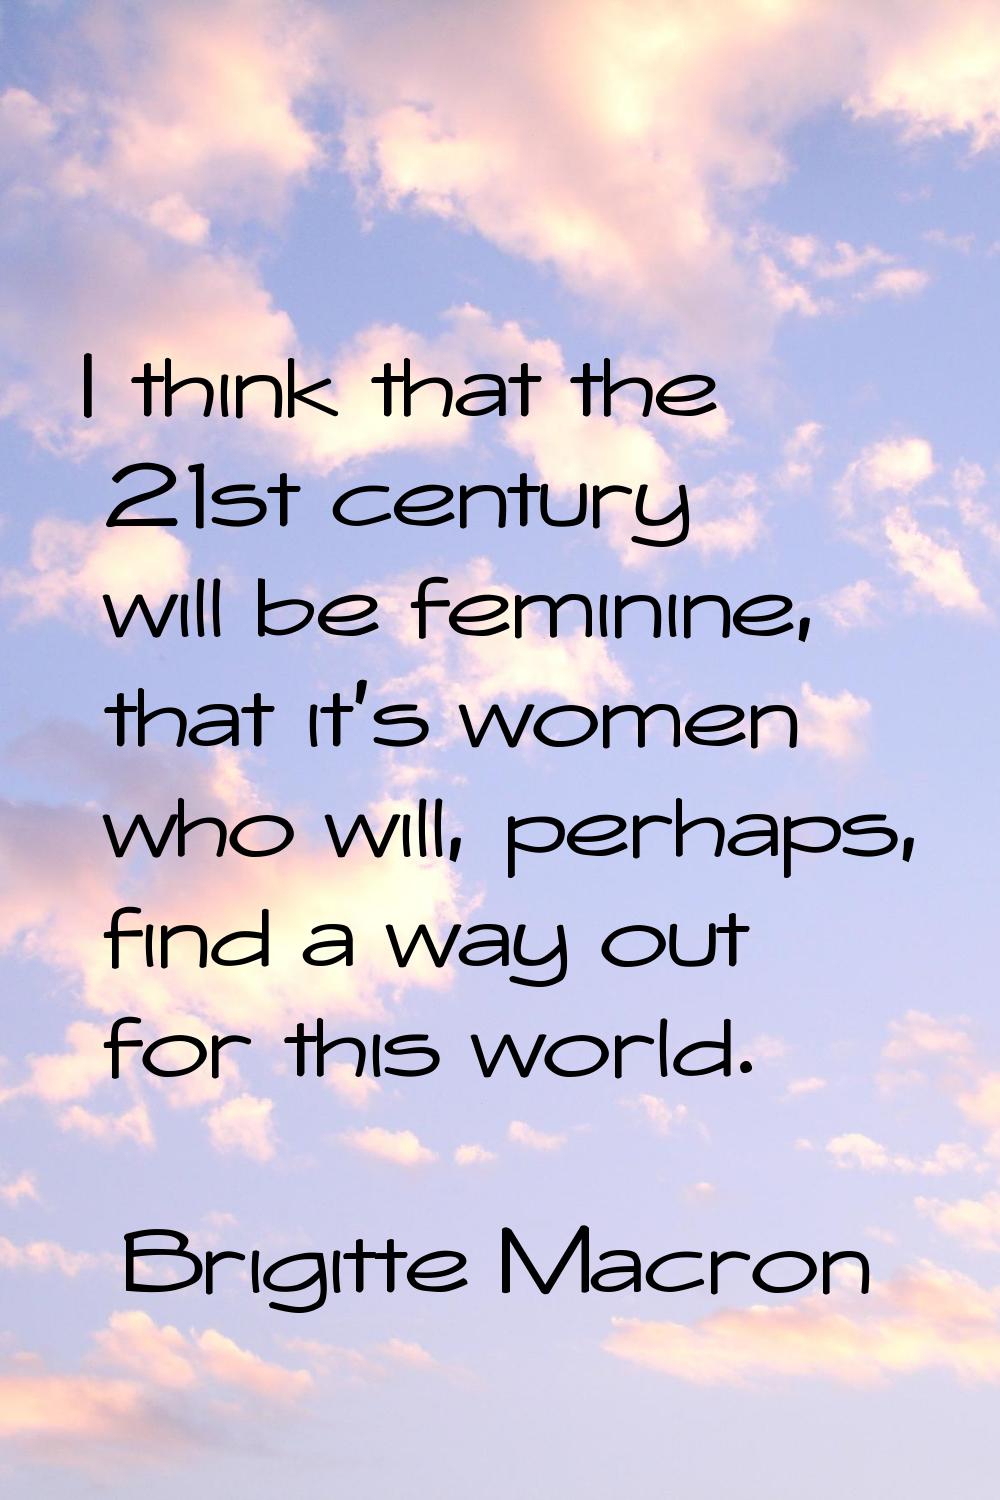 I think that the 21st century will be feminine, that it's women who will, perhaps, find a way out f